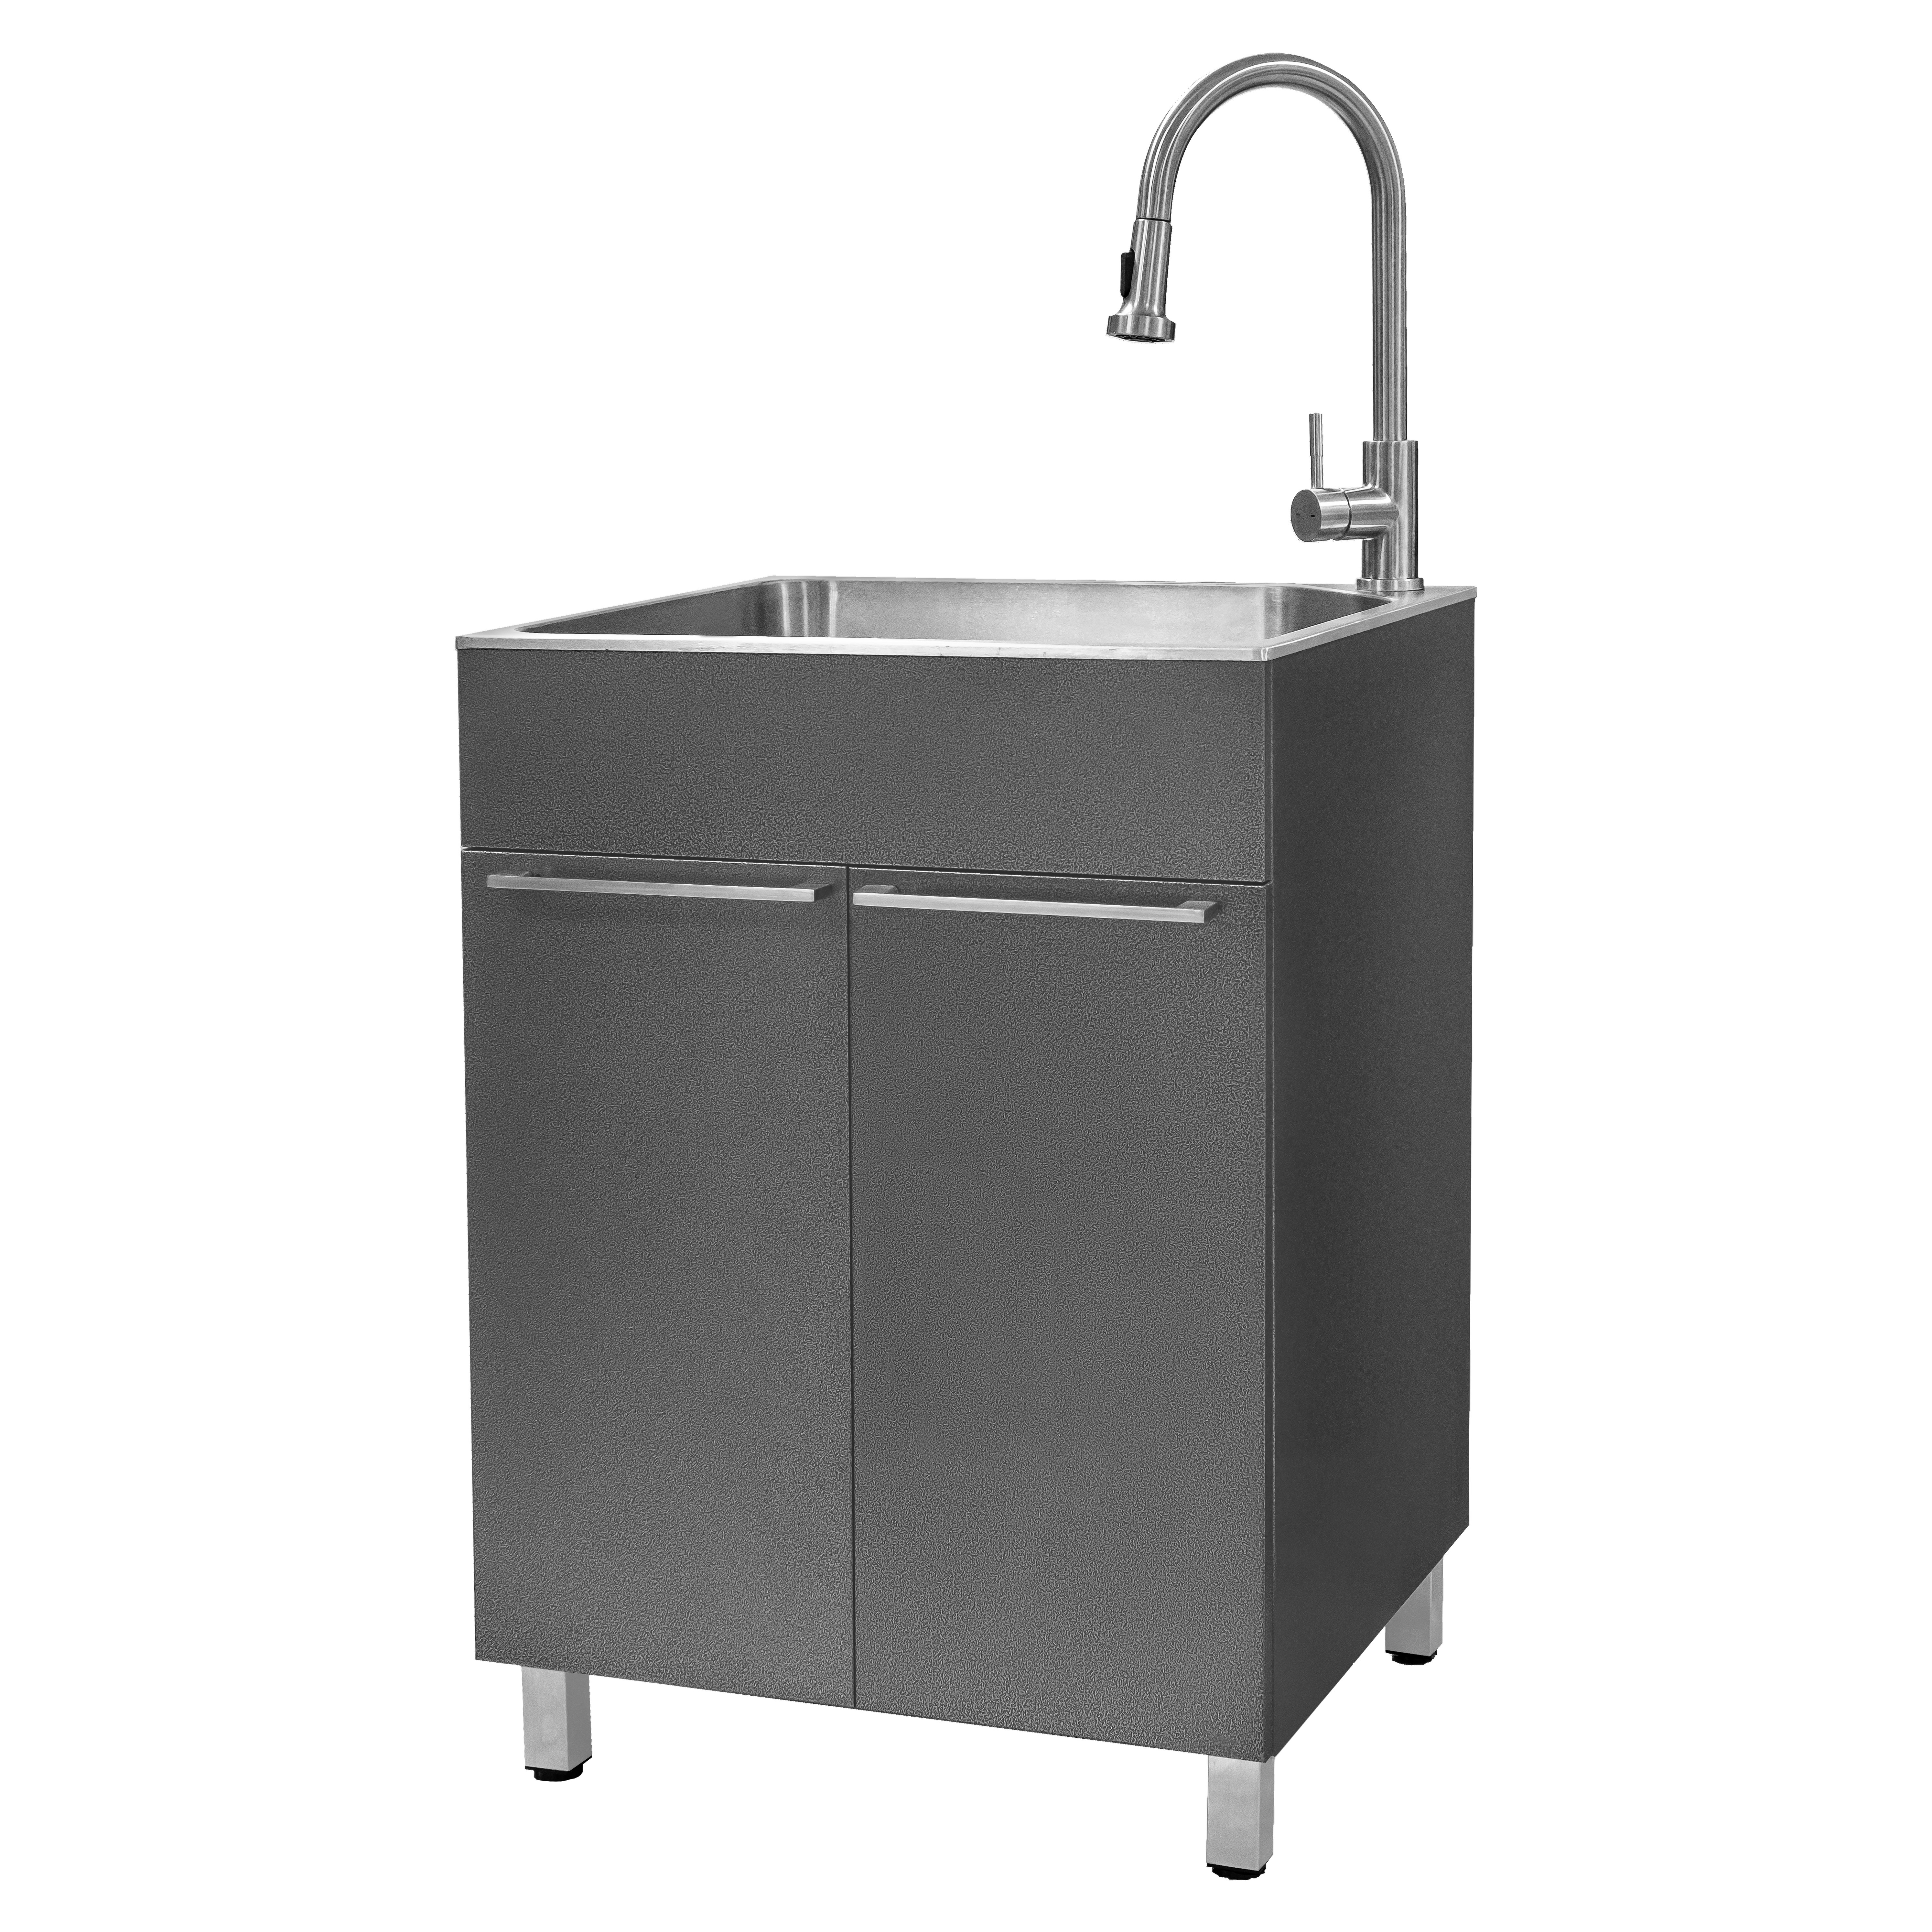 presenza All-in-One 24 in. x 21.2 in. x 34 in. Stainless Steel Drop-In Sink and Cabinet with Faucet in Gray 76776